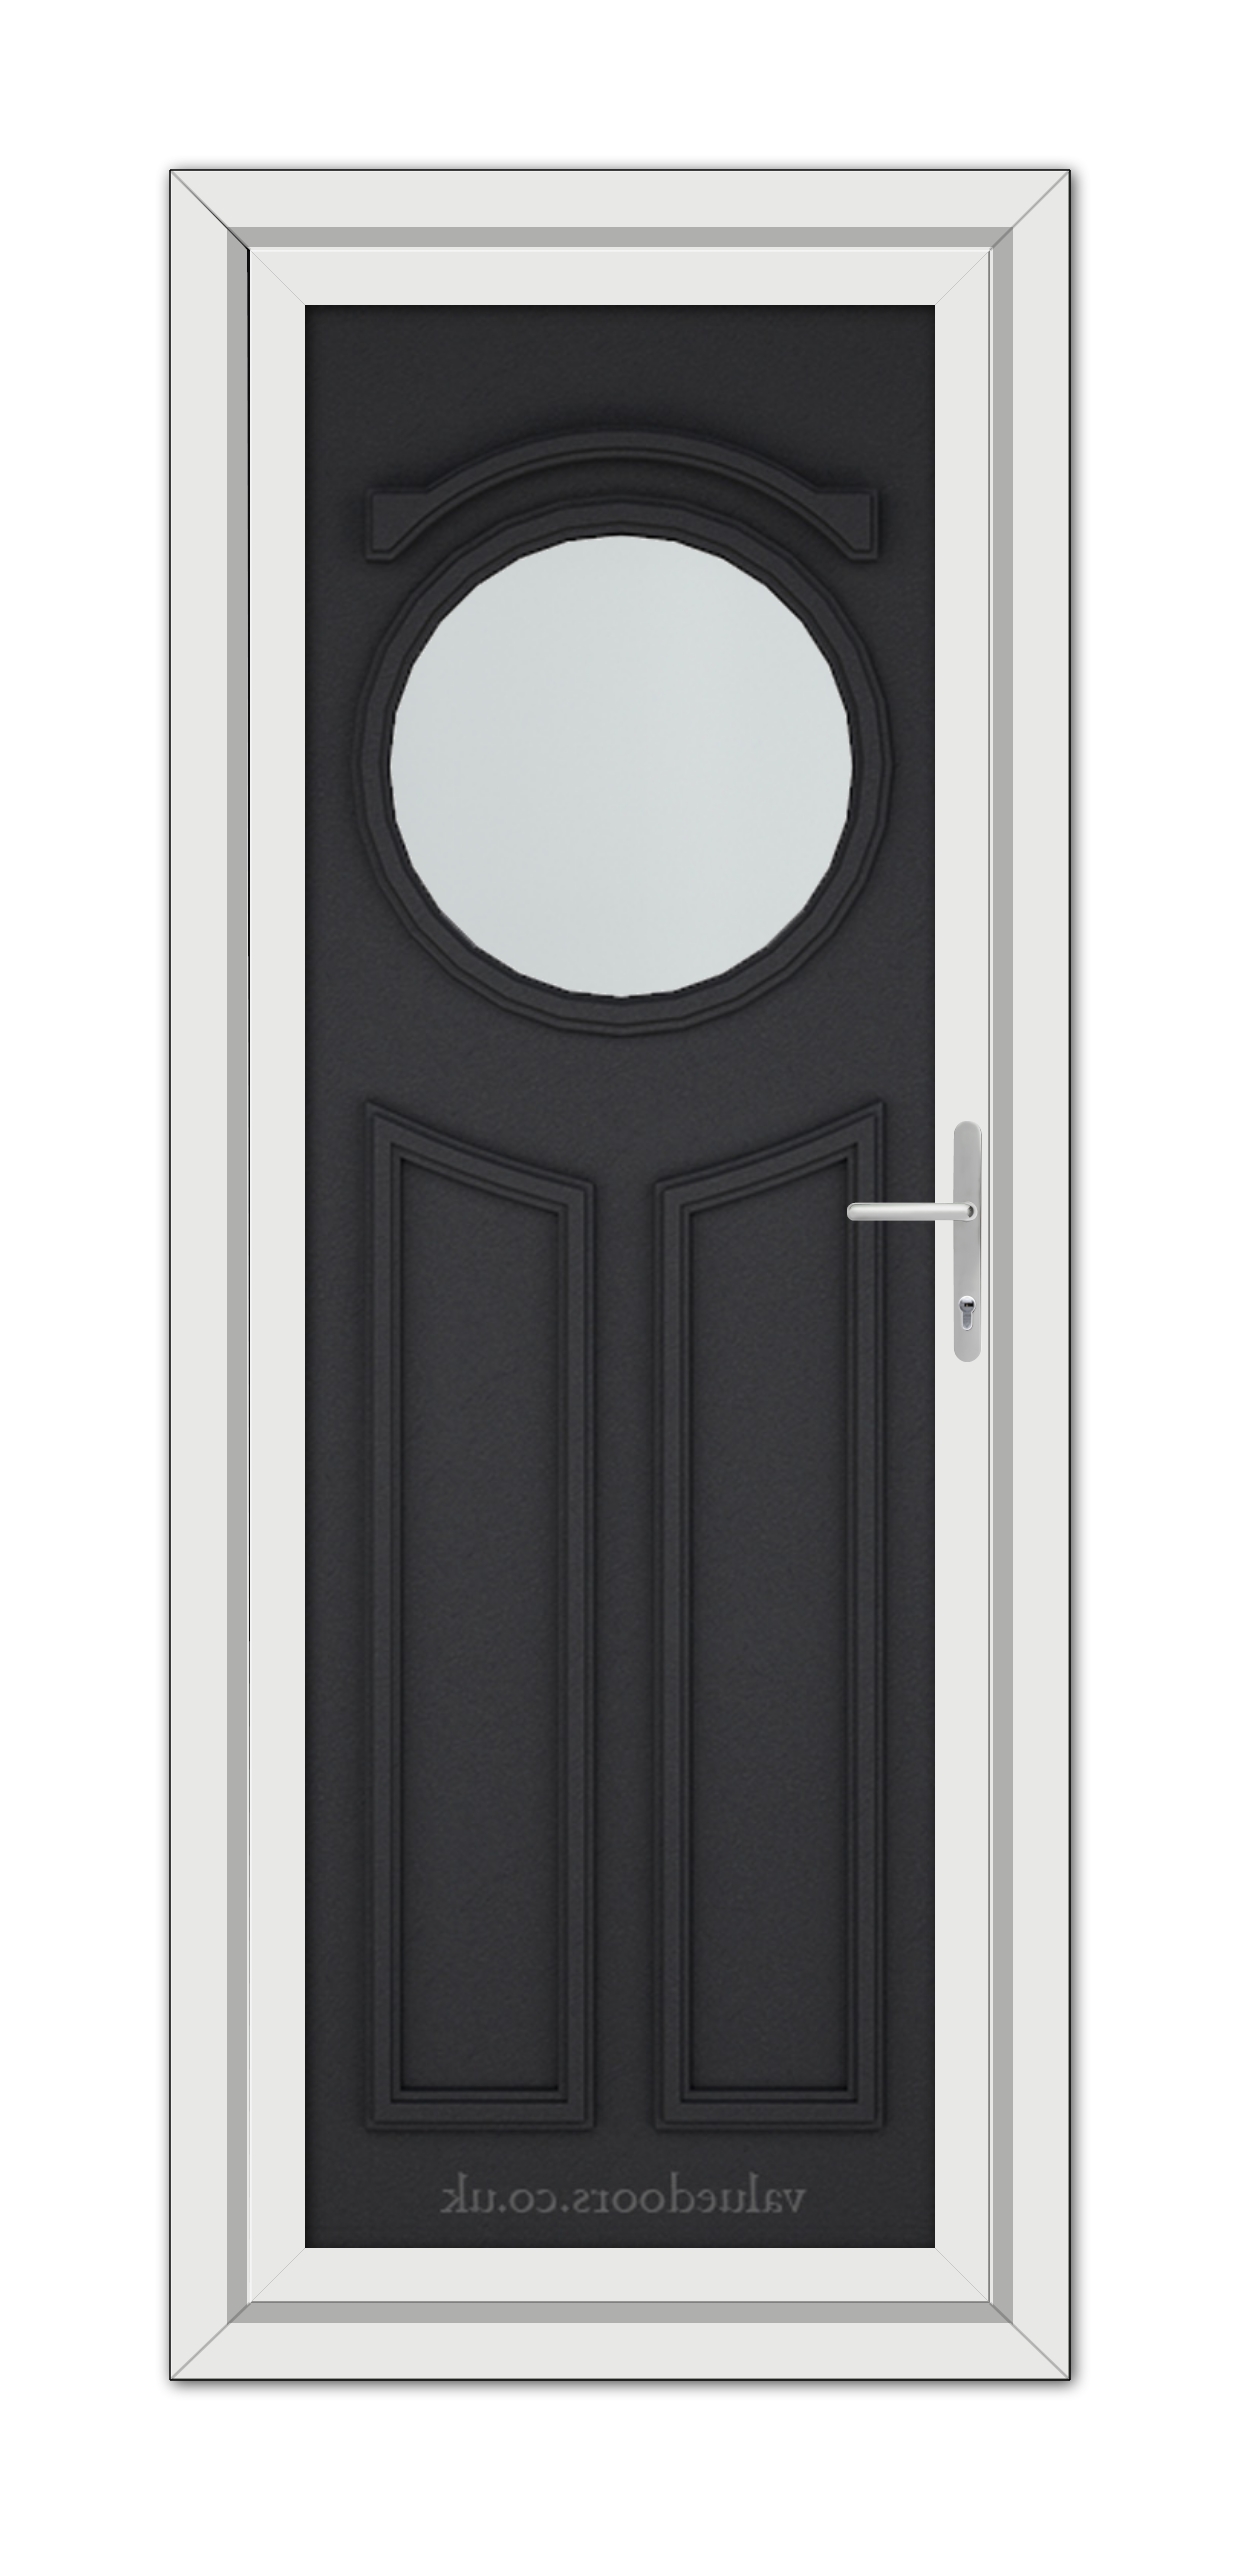 A vertical image of a Black Brown Blenheim uPVC Door with a circular window at the top, framed in white, featuring a sleek handle on the right side.